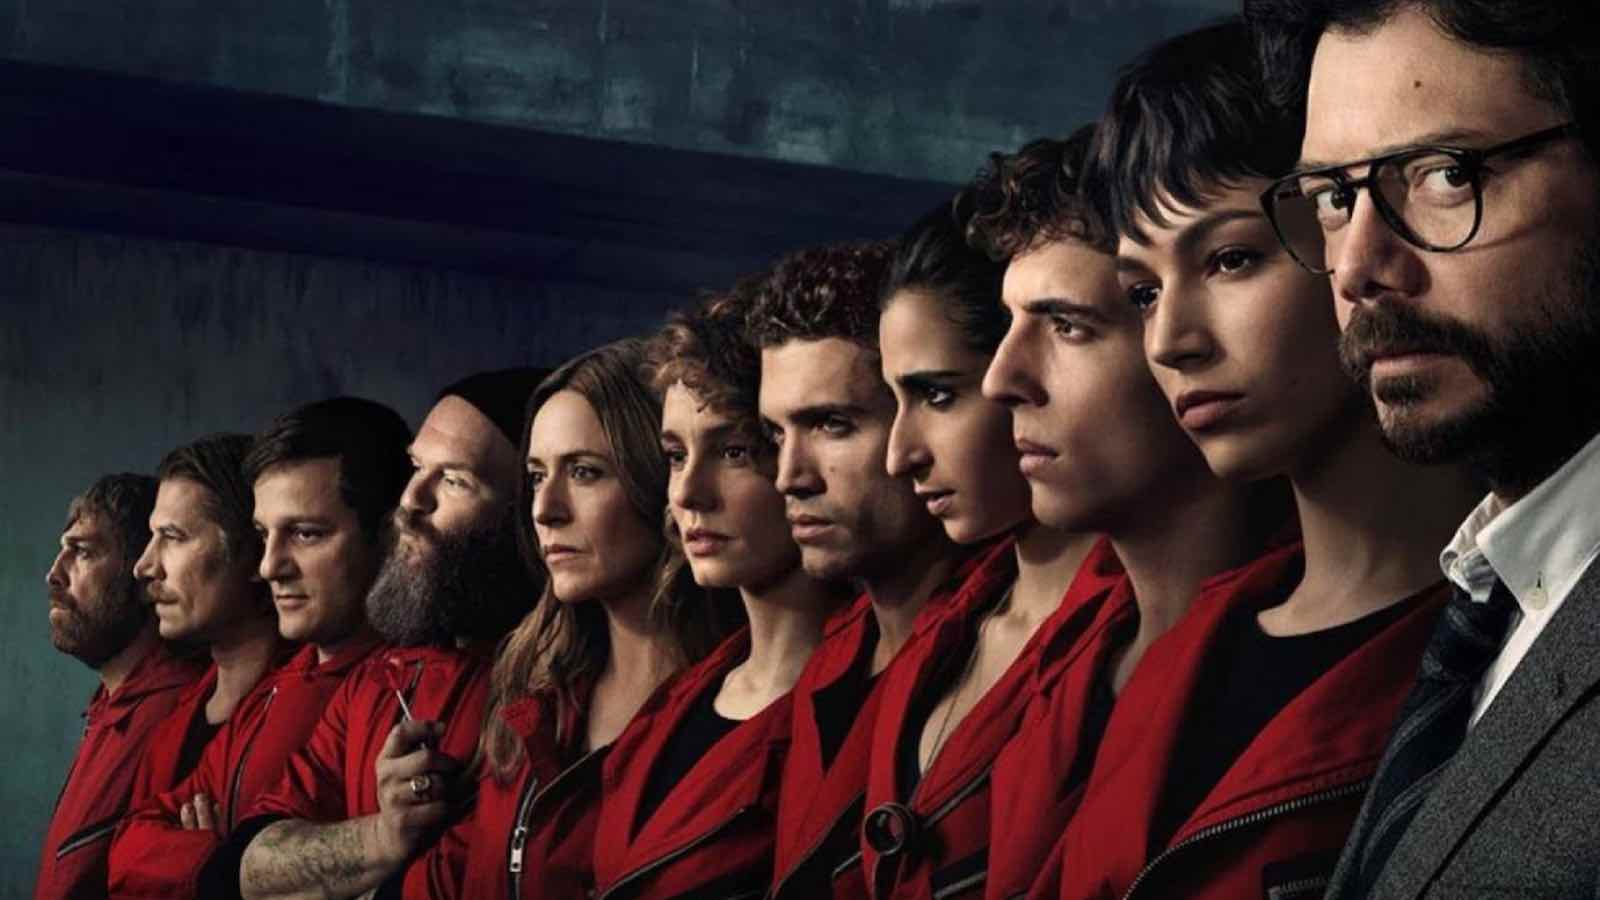 Part 4 is actually already filmed. We’re salivating at the thought, since Netflix's 'Money Heist' is some of the most gripping television produced – ever.